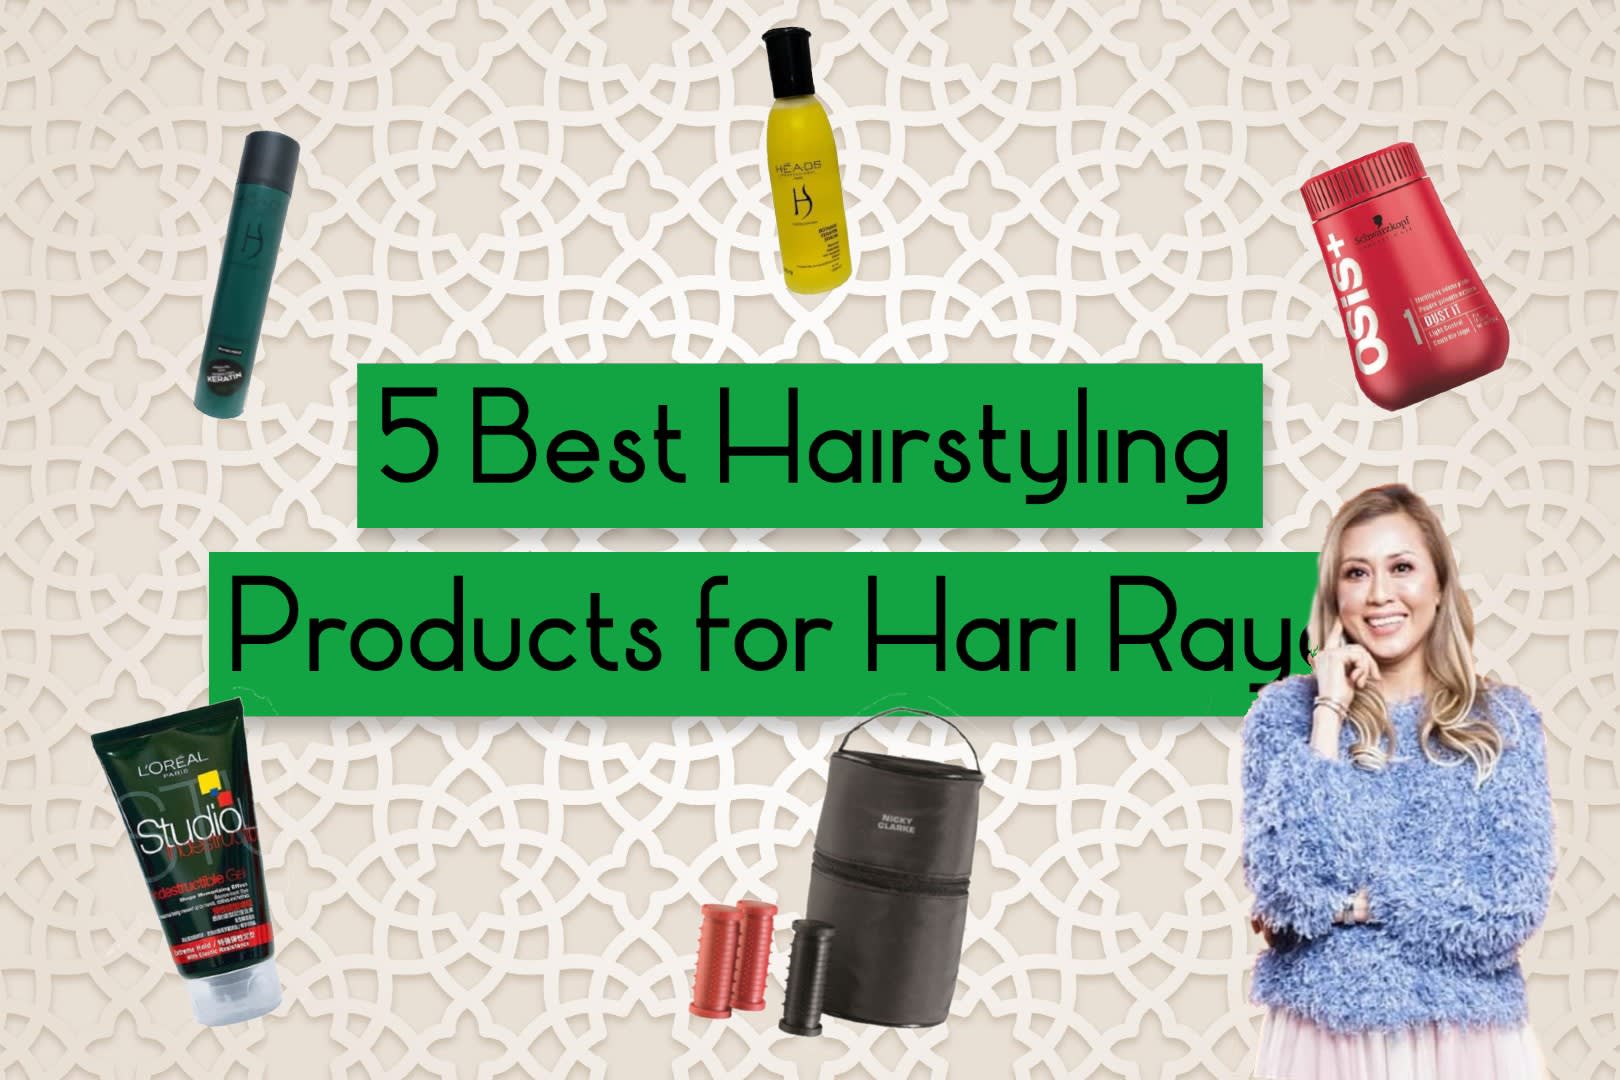 Best Hairstyling Products for Hari Raya - Emma Mohd